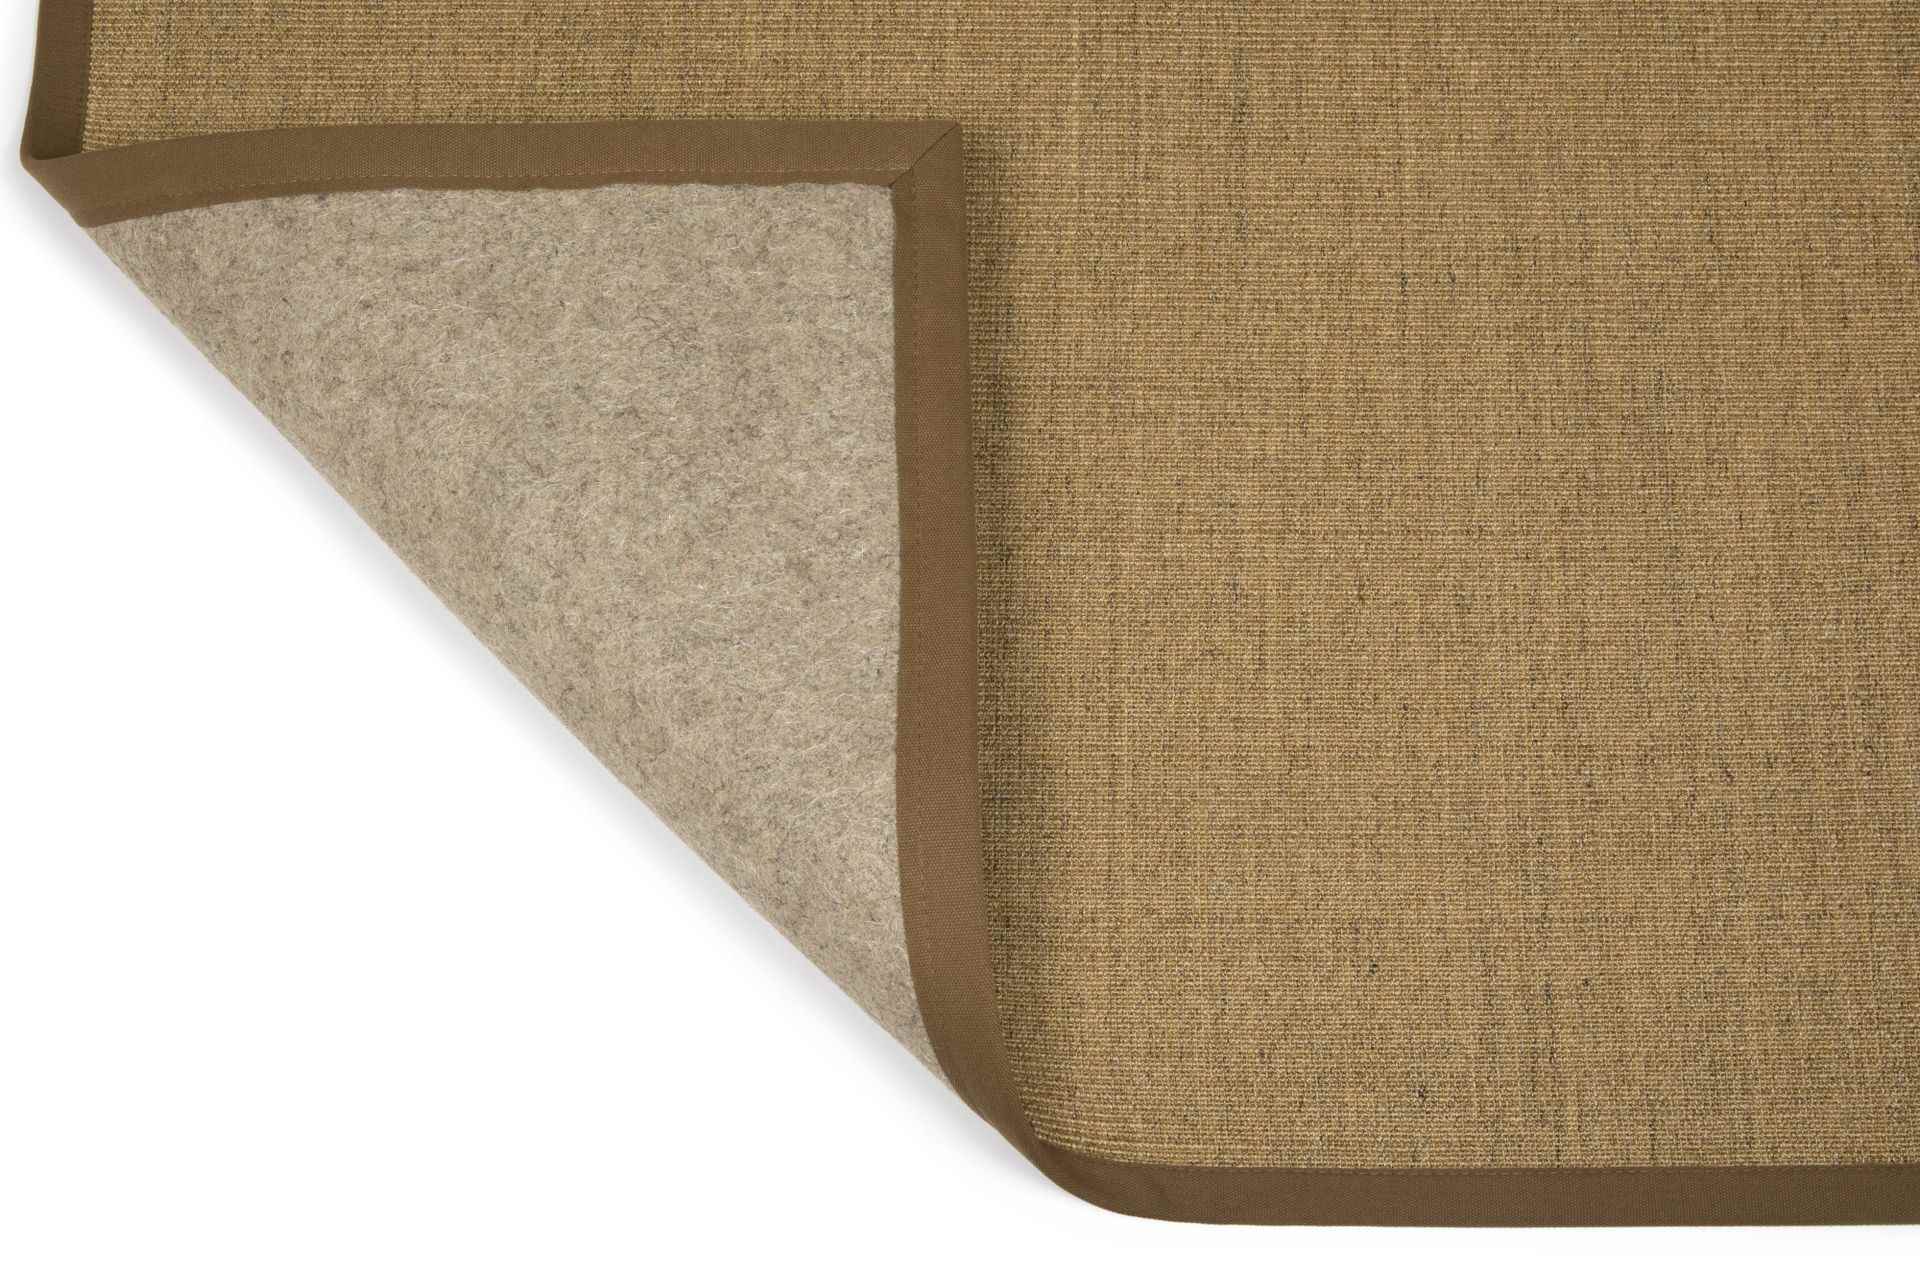 Purstoff pecan brown flipped corner with visible felt backing